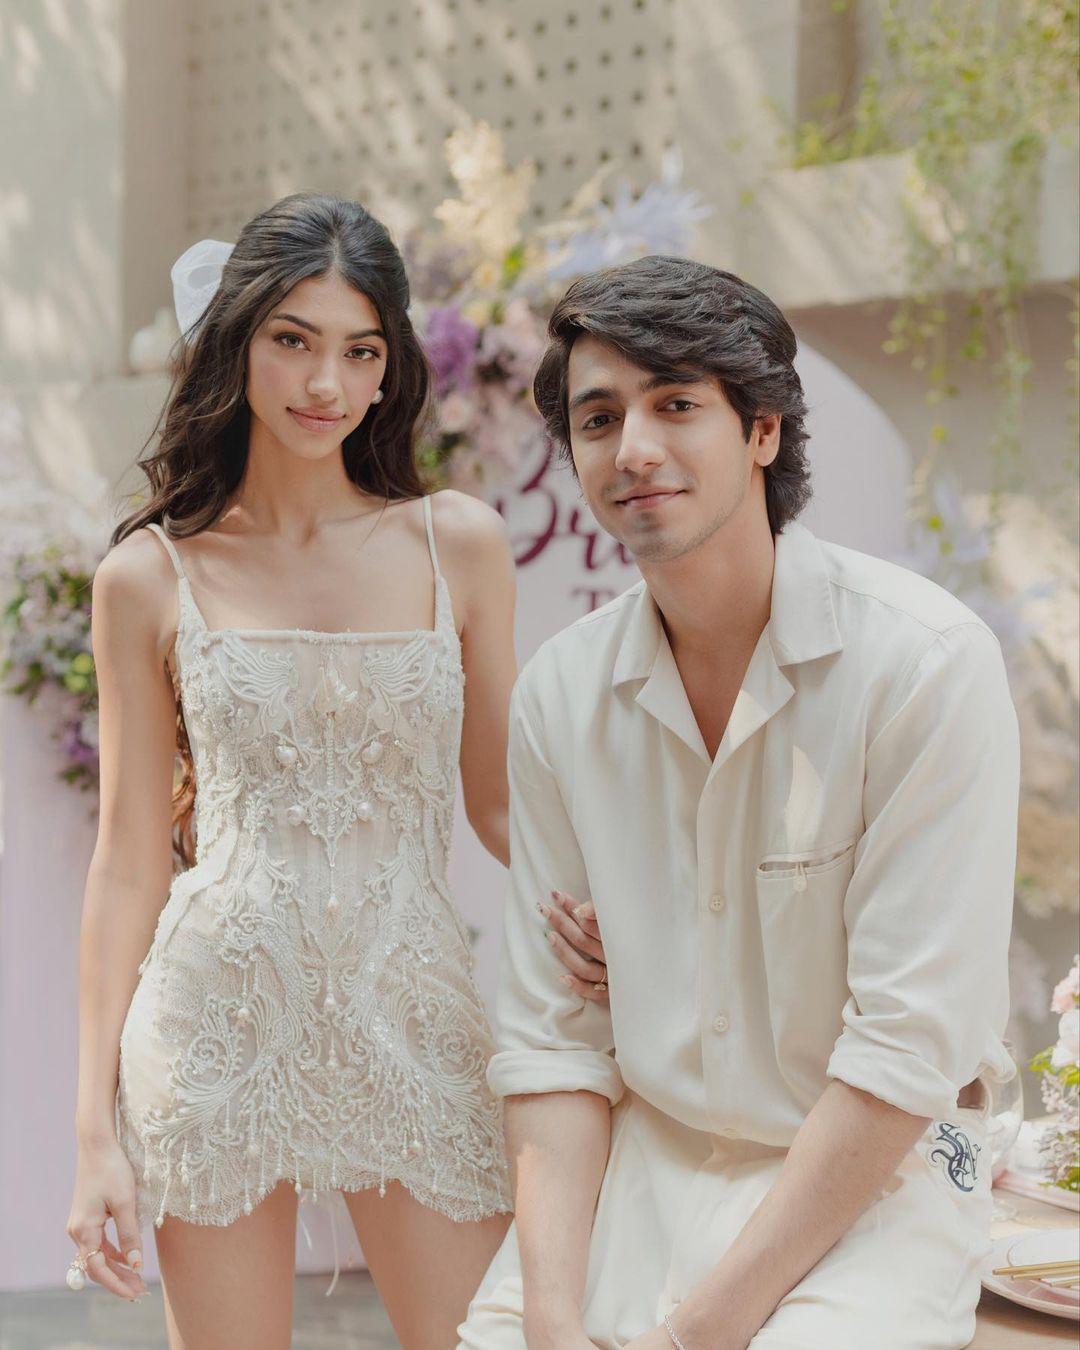 Alana's all about the fashion game, and Ahaan's got this smooth vibe that's hard to miss – he's already getting noticed,